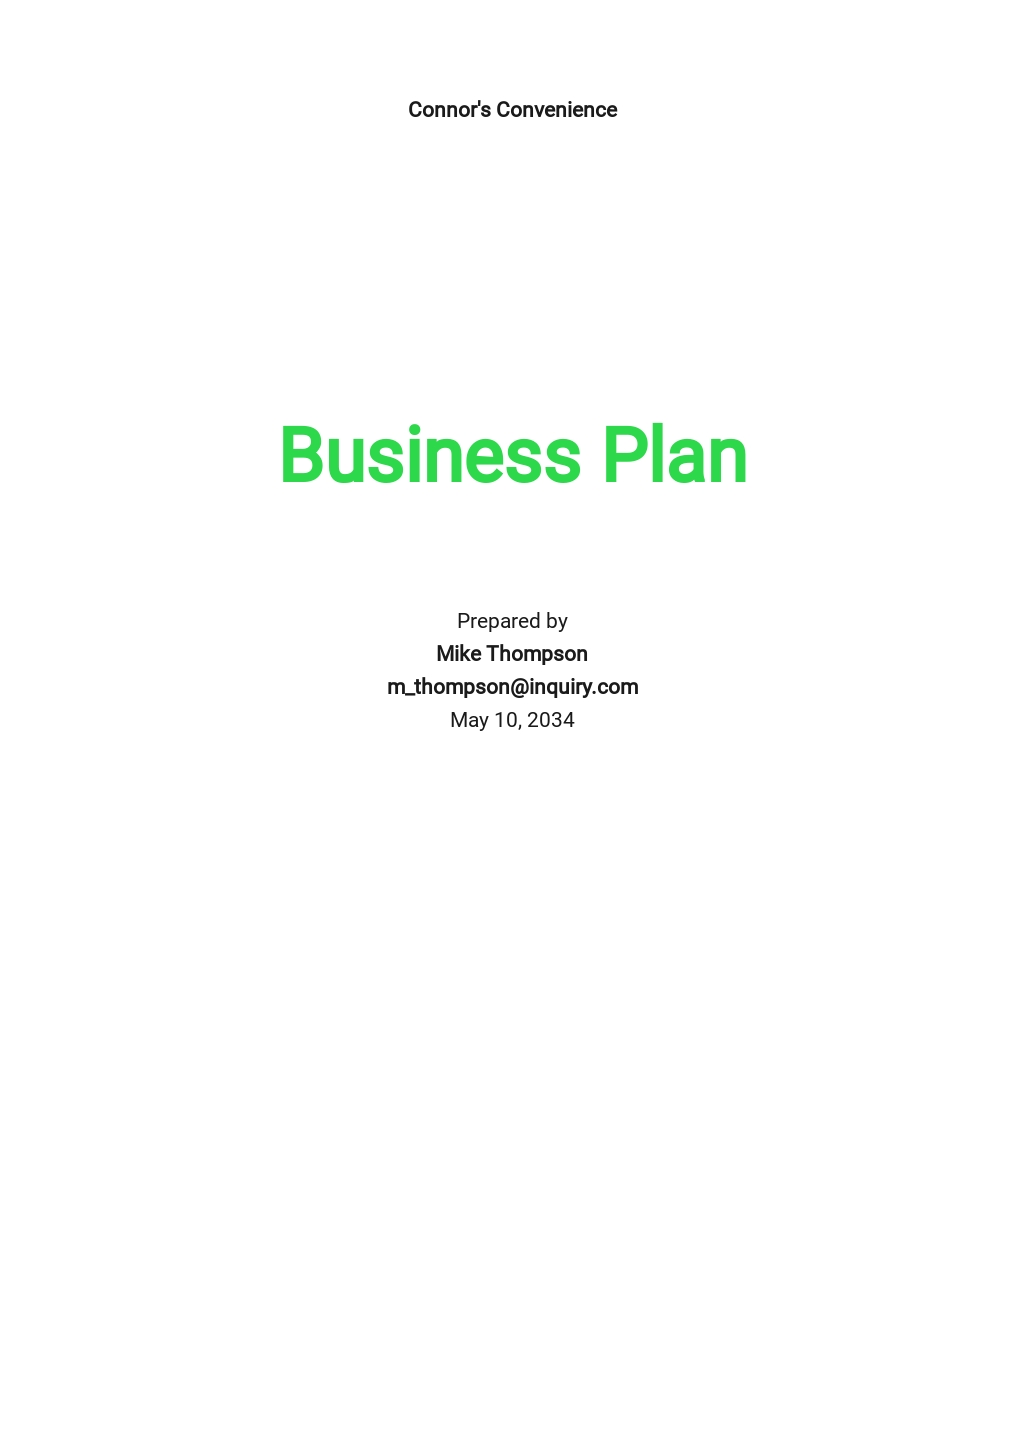 sample business plan for convenience store